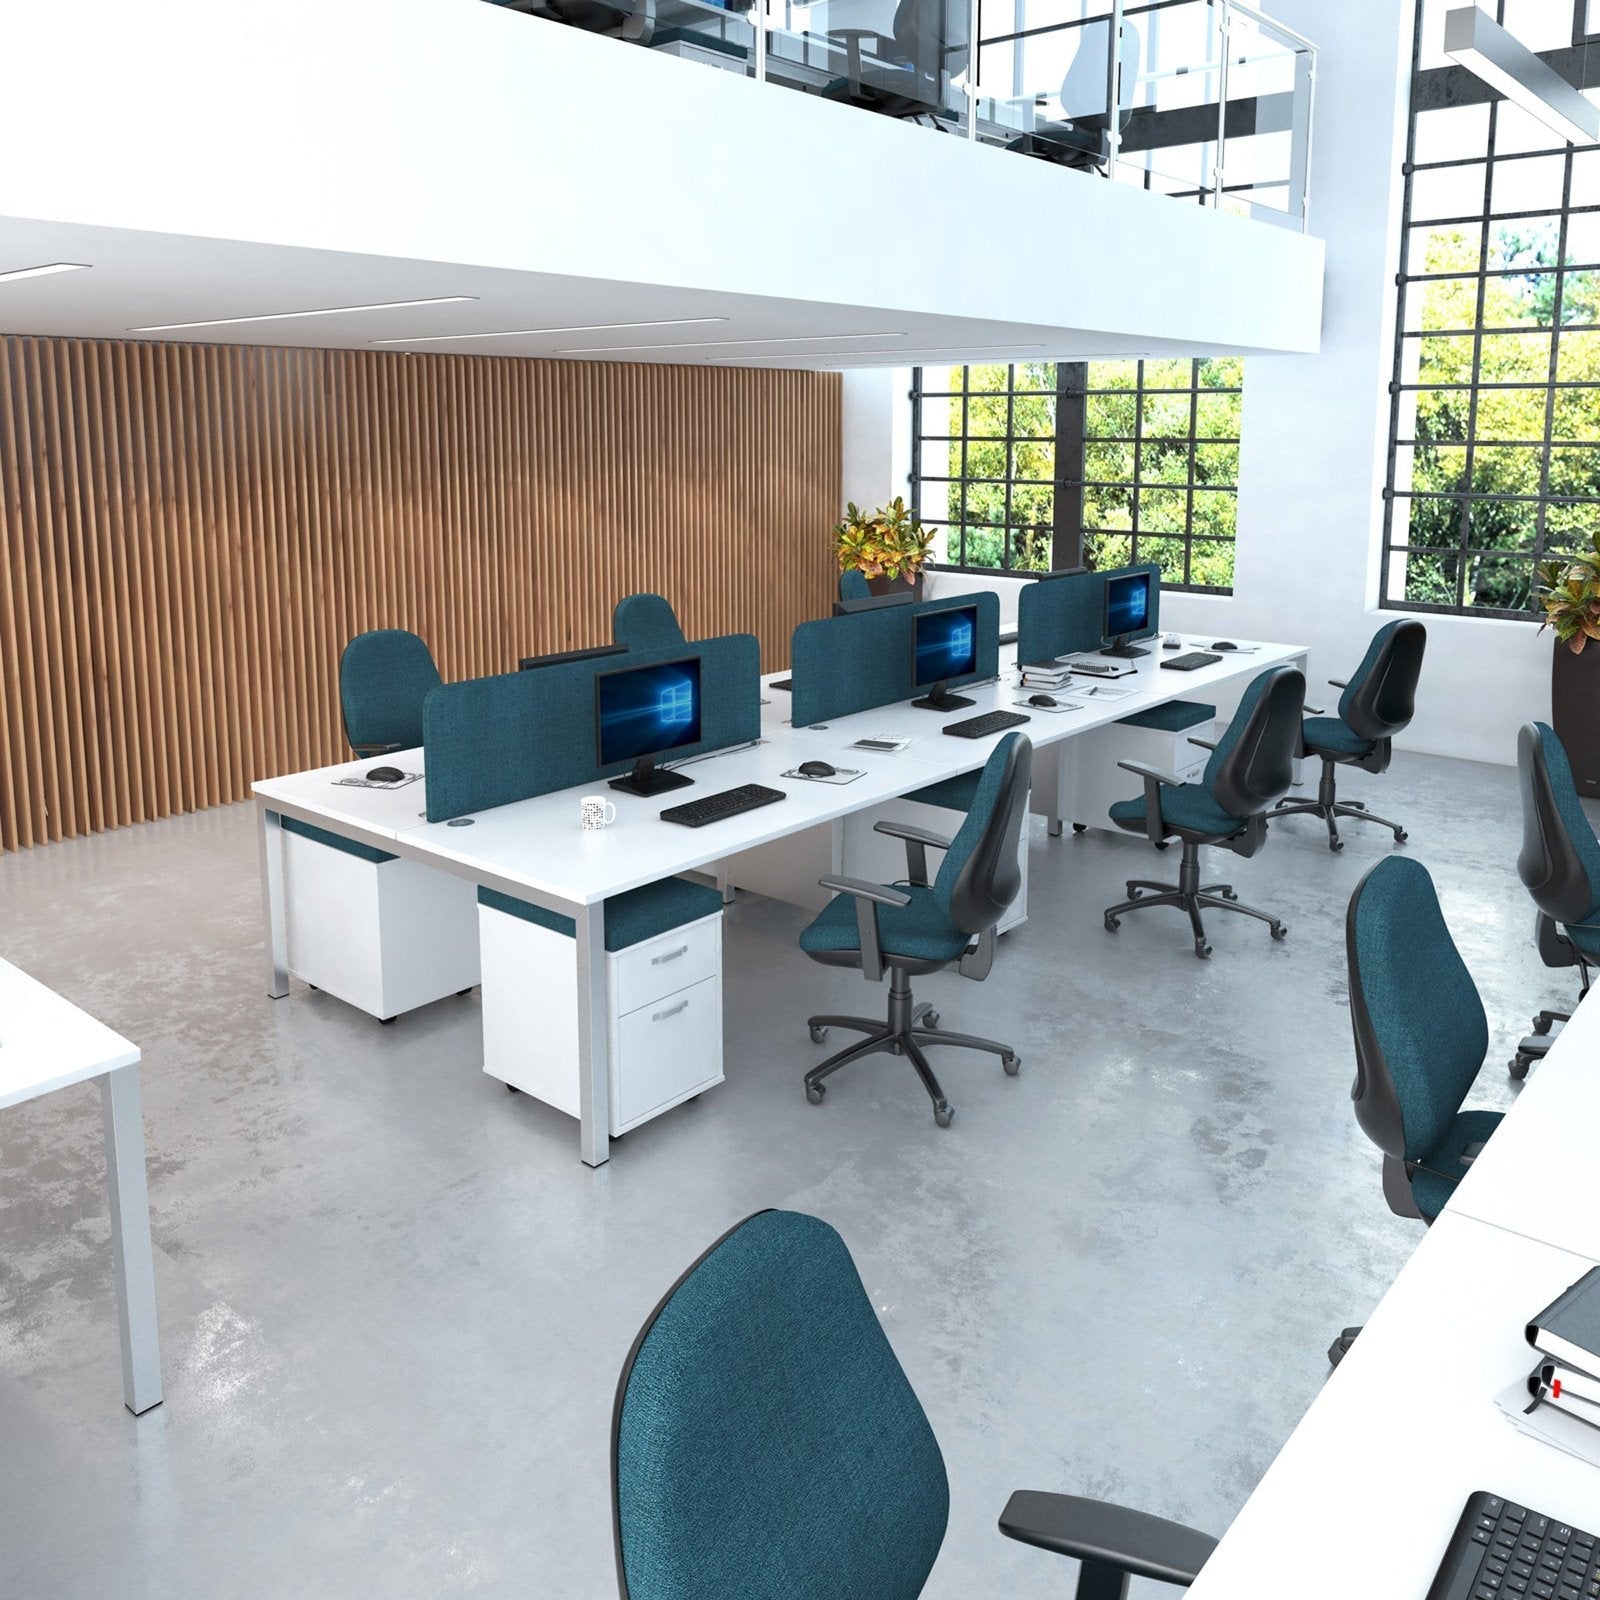 Connex to back desks - Office Products Online